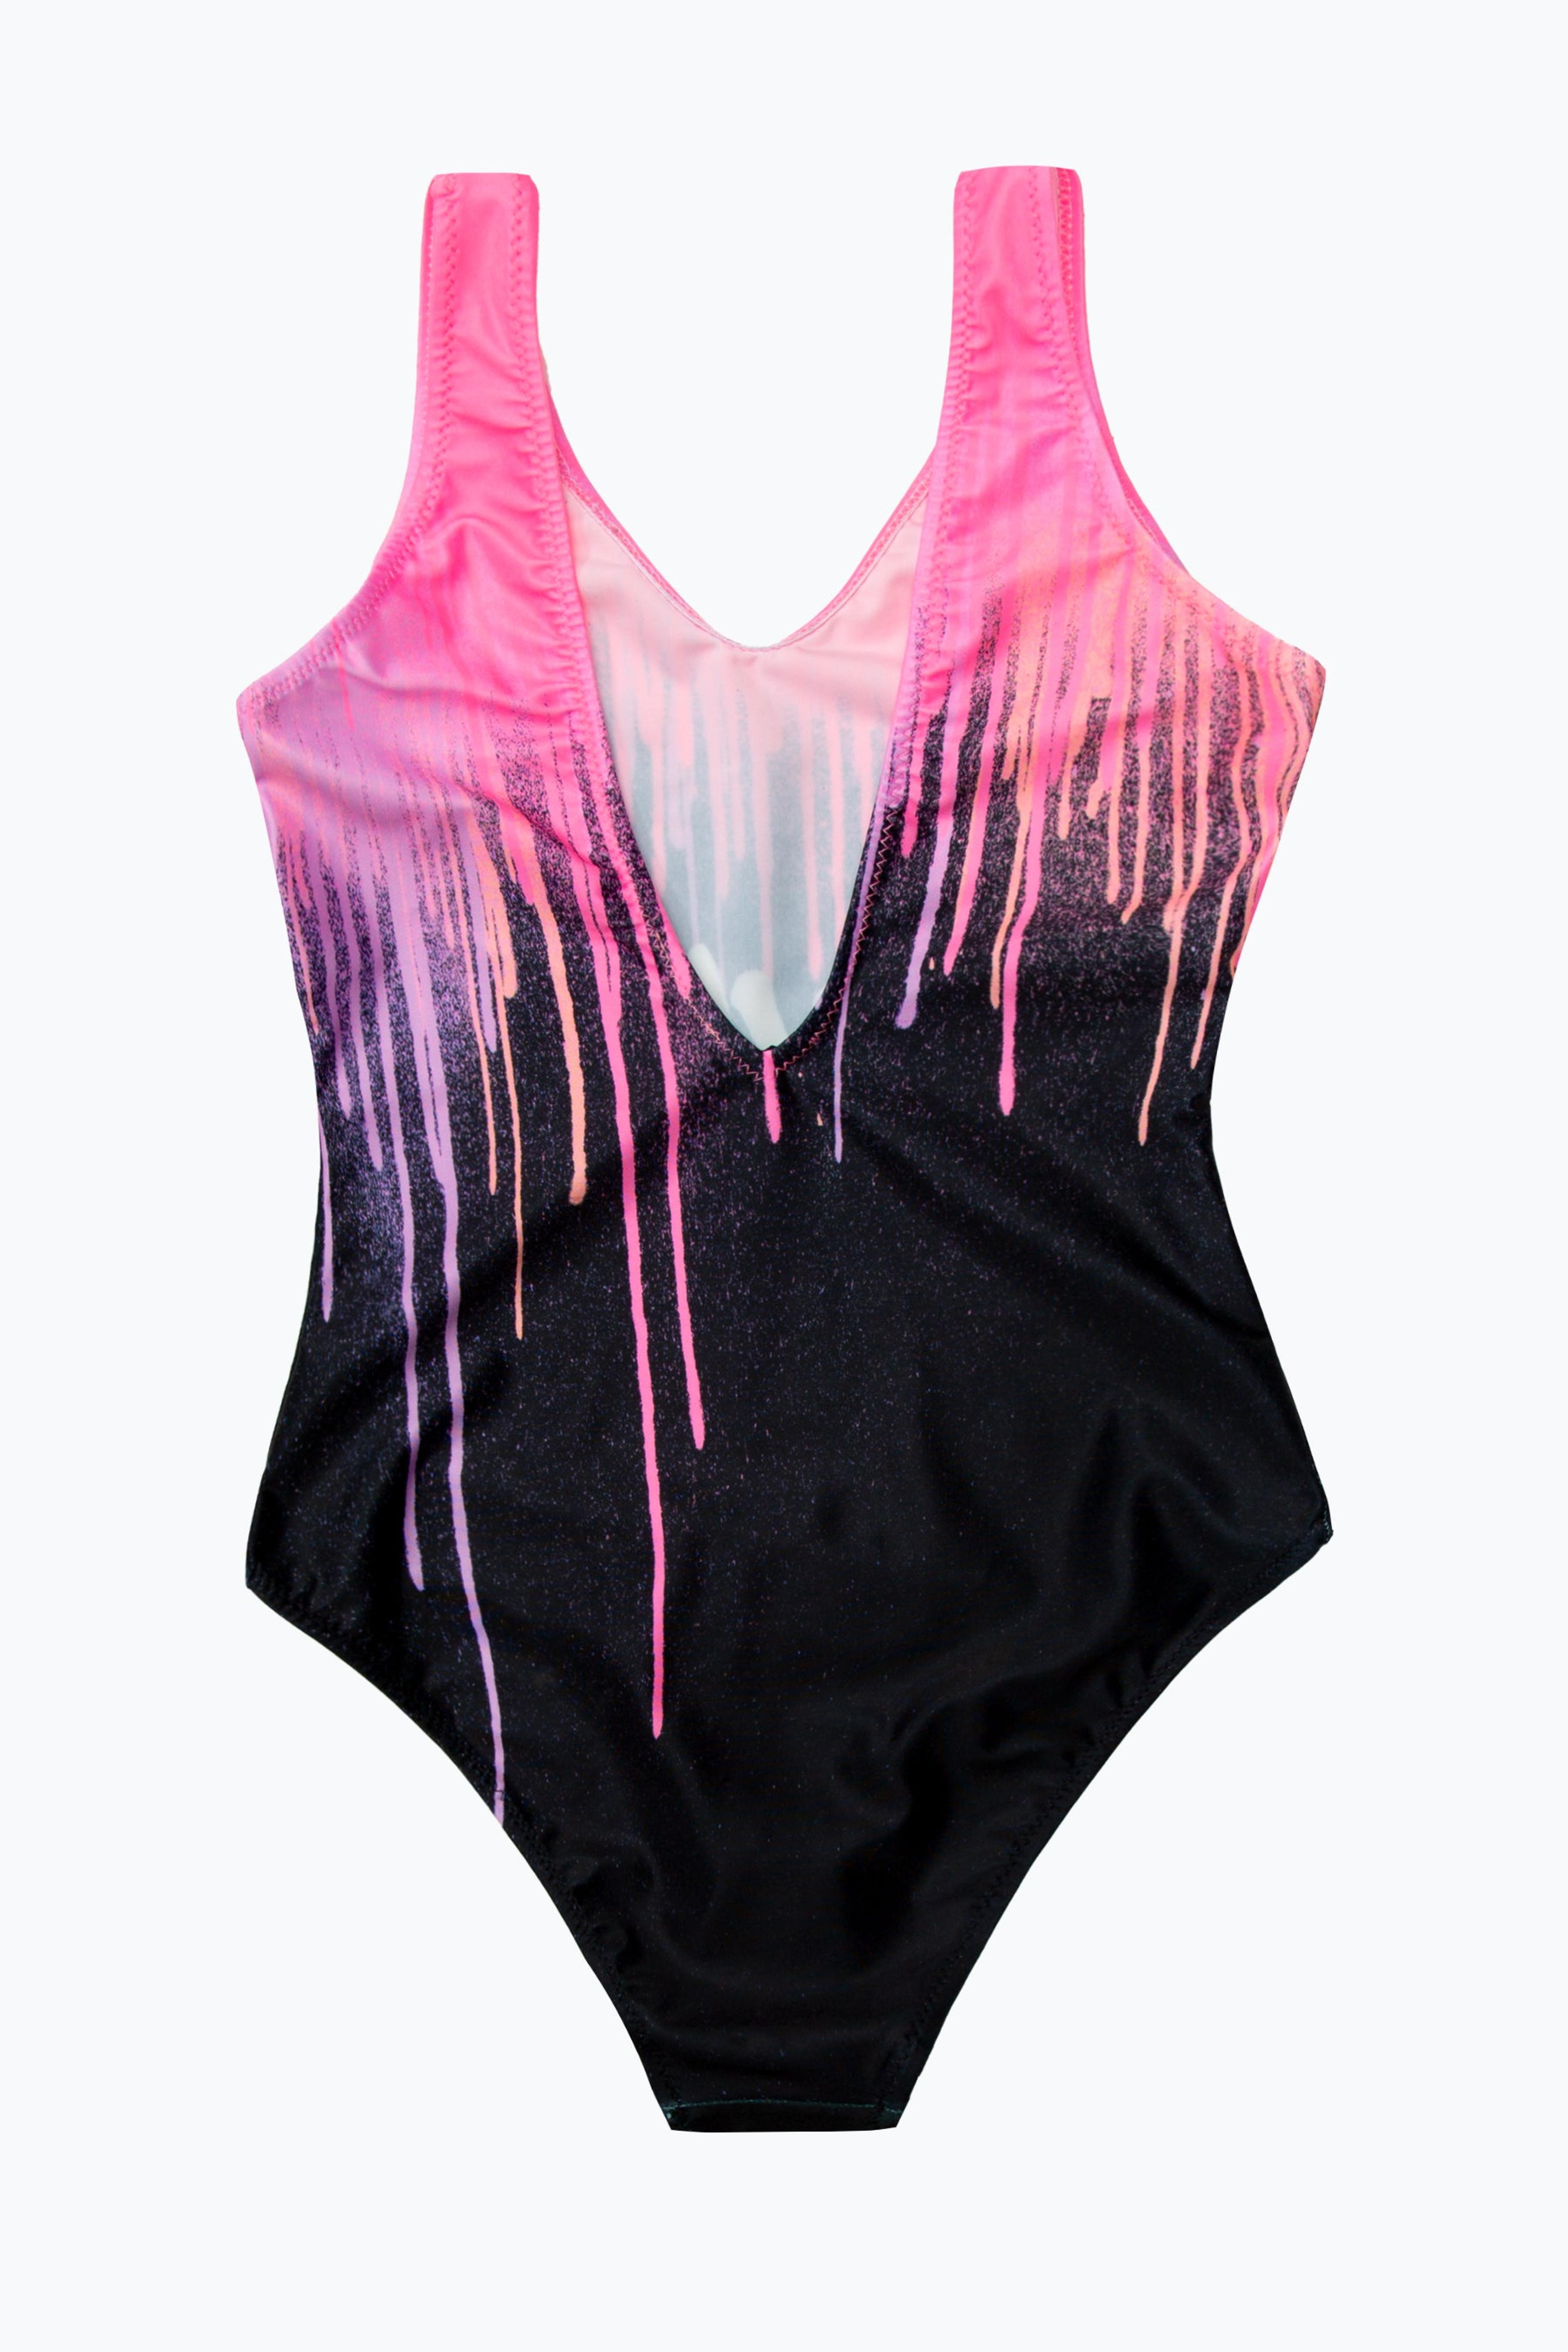 Alternate View 1 of HYPE GIRLS PINK DRIPS SCRIPT SWIMSUIT